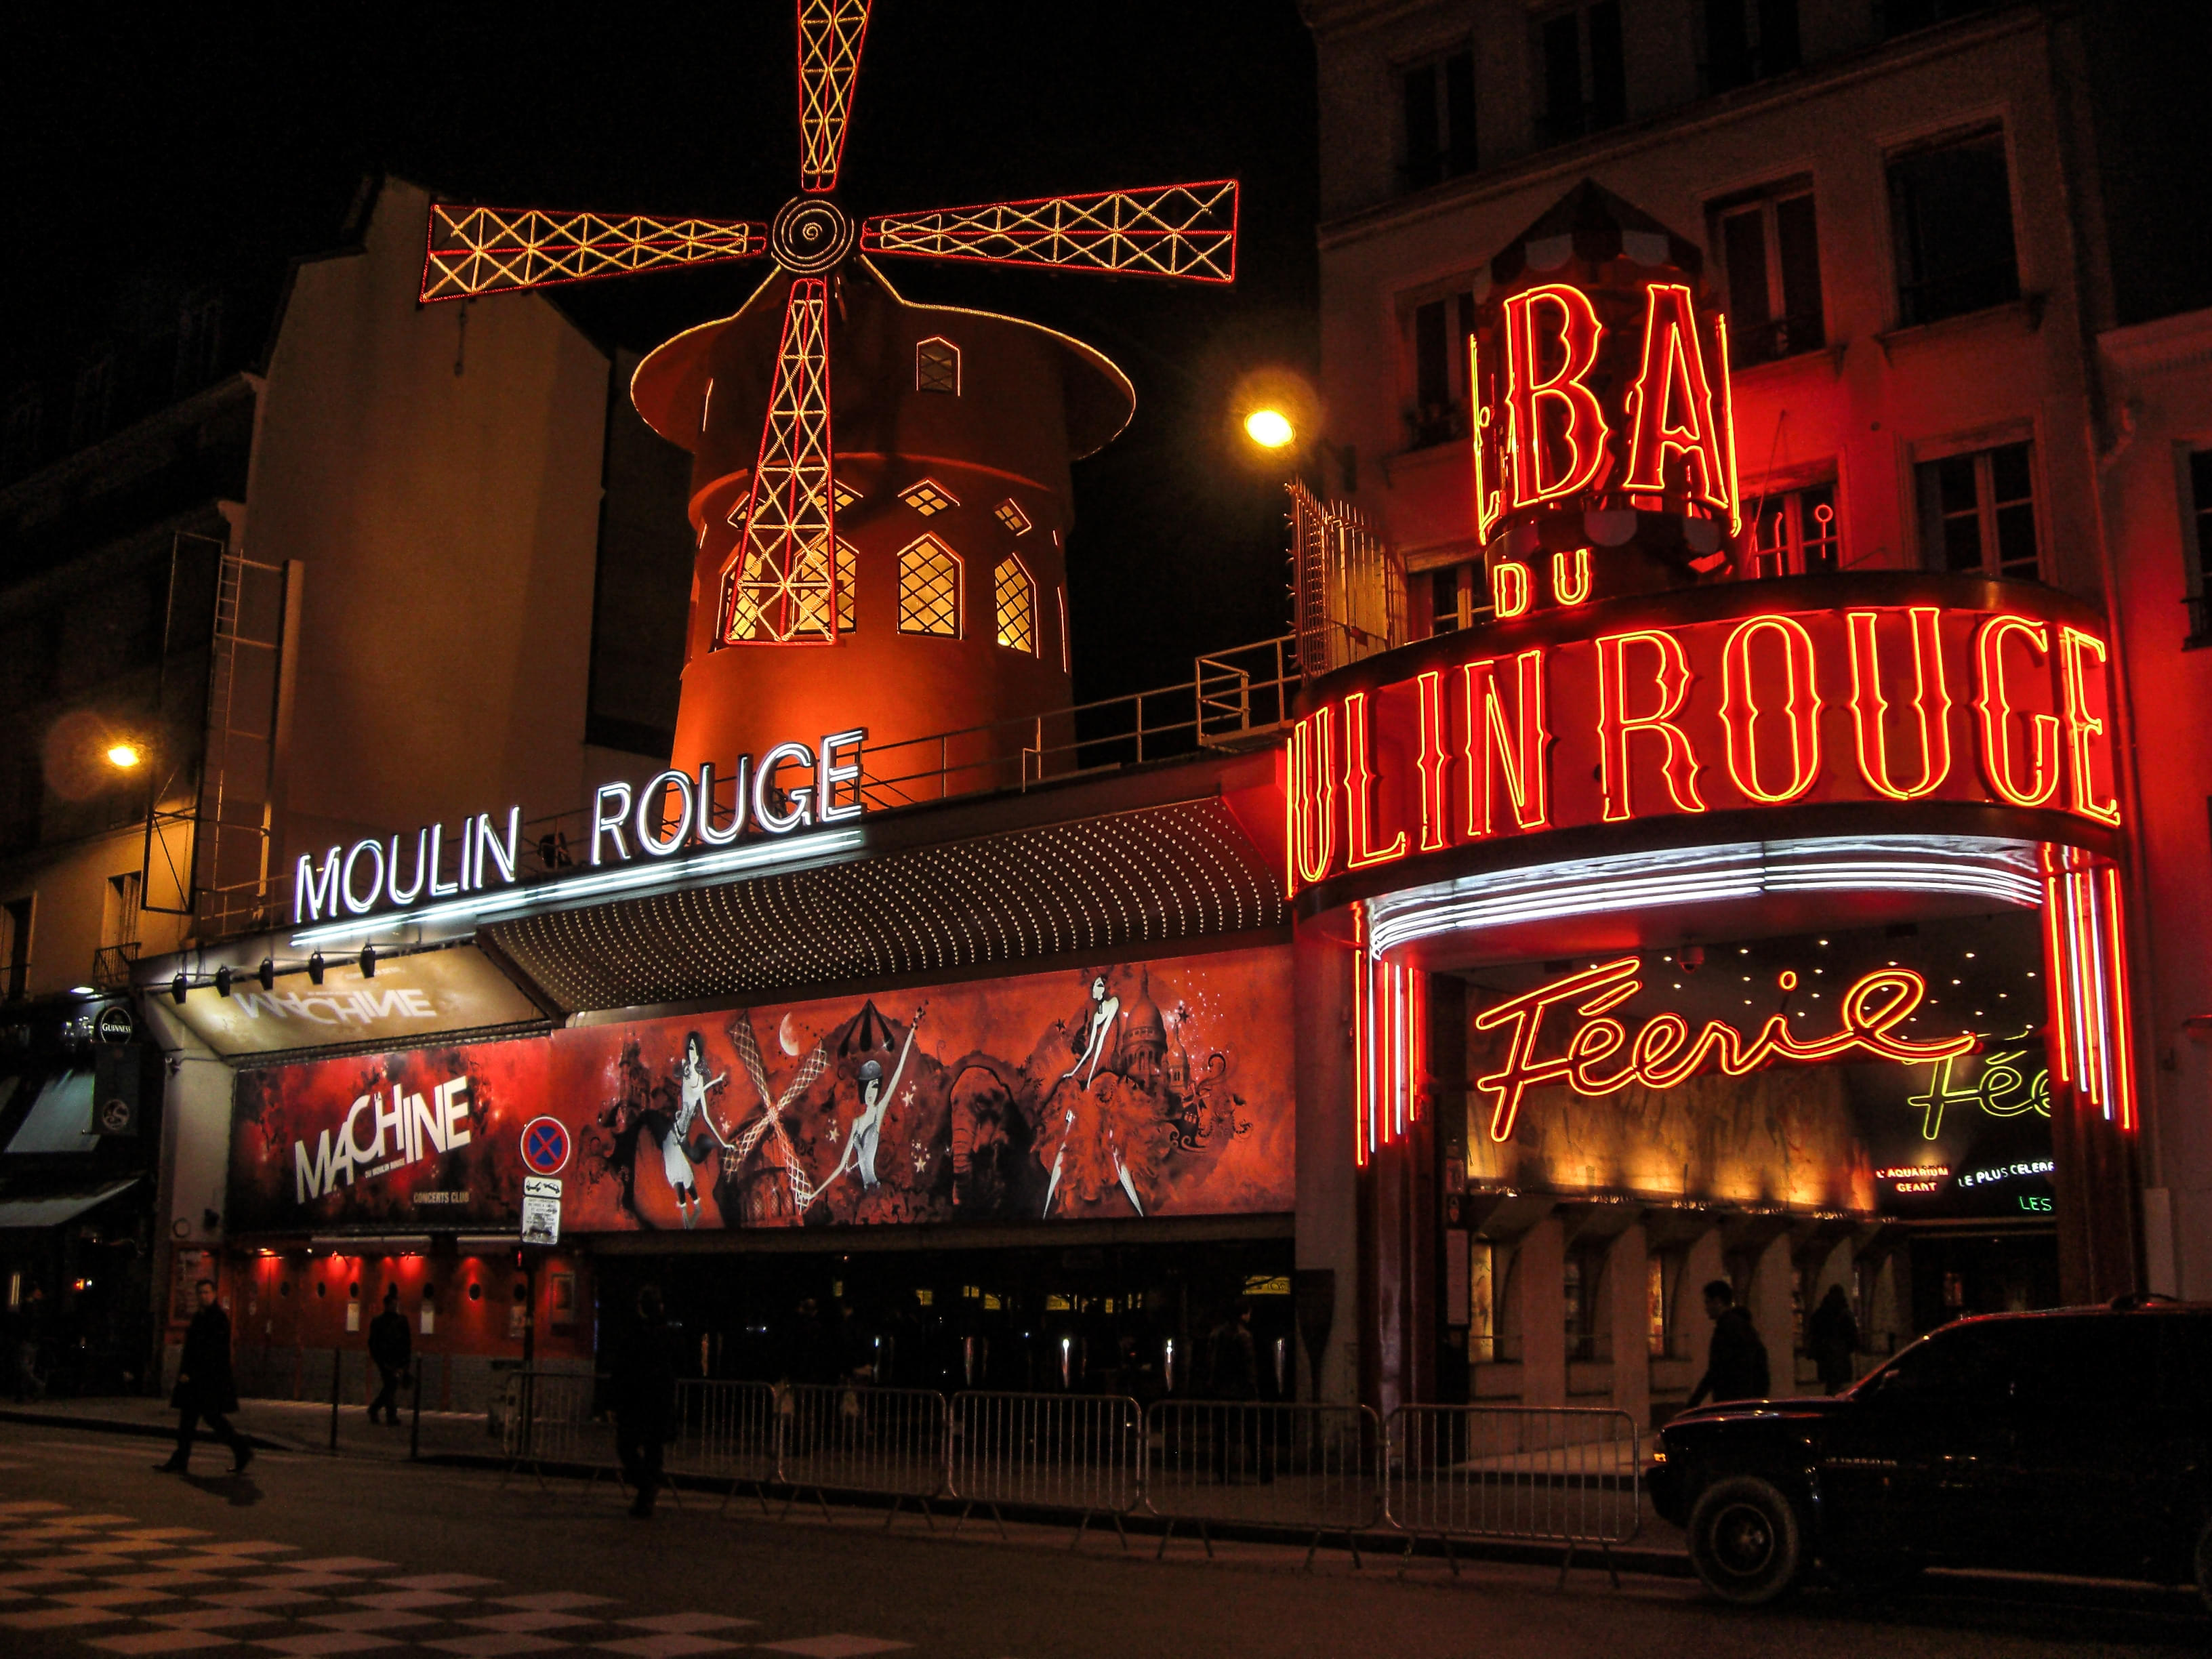 Enjoy at The Moulin Rouge